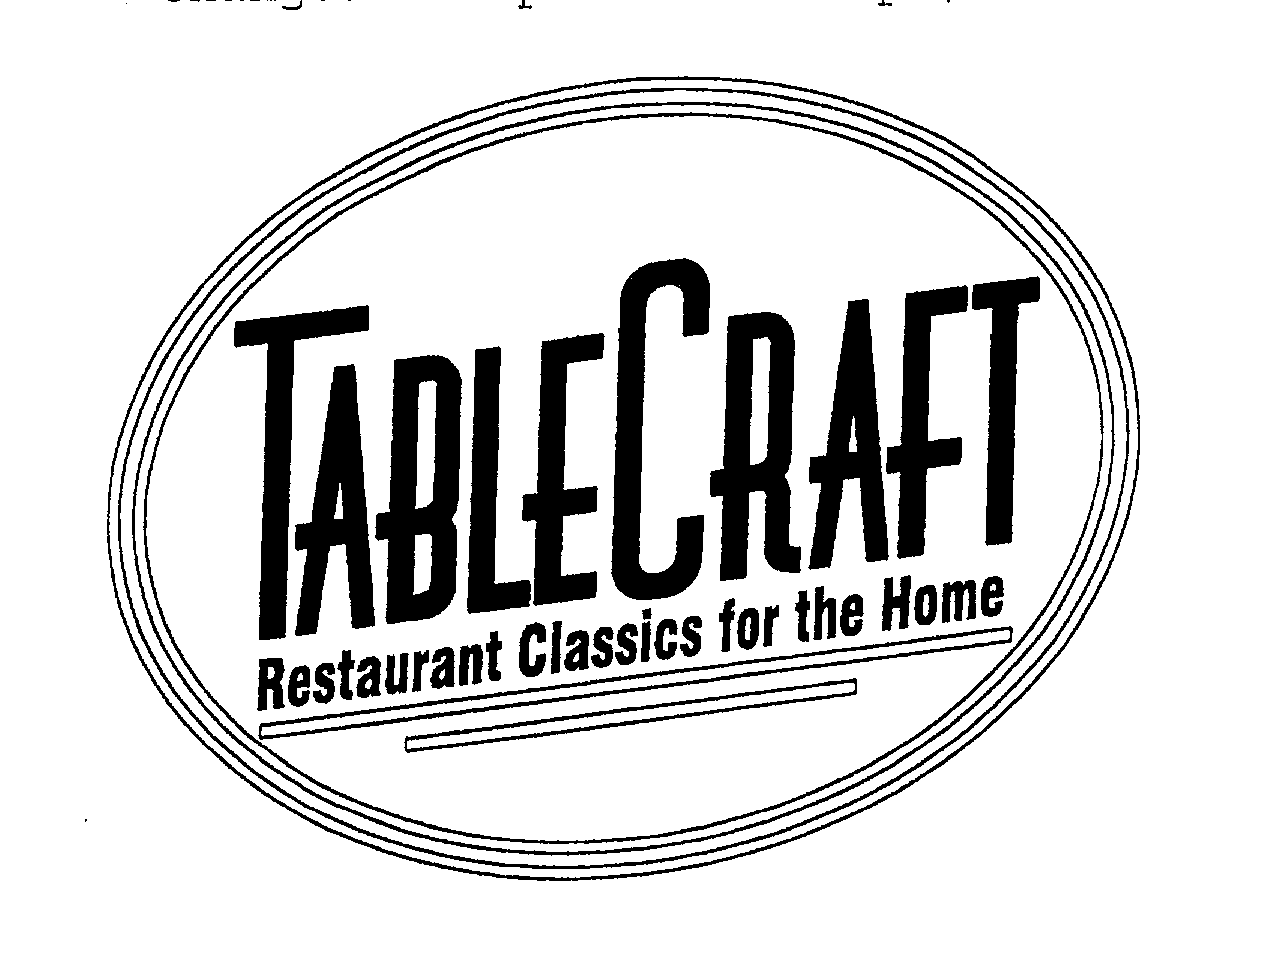  TABLECRAFT RESTAURANT CLASSICS FOR THE HOME